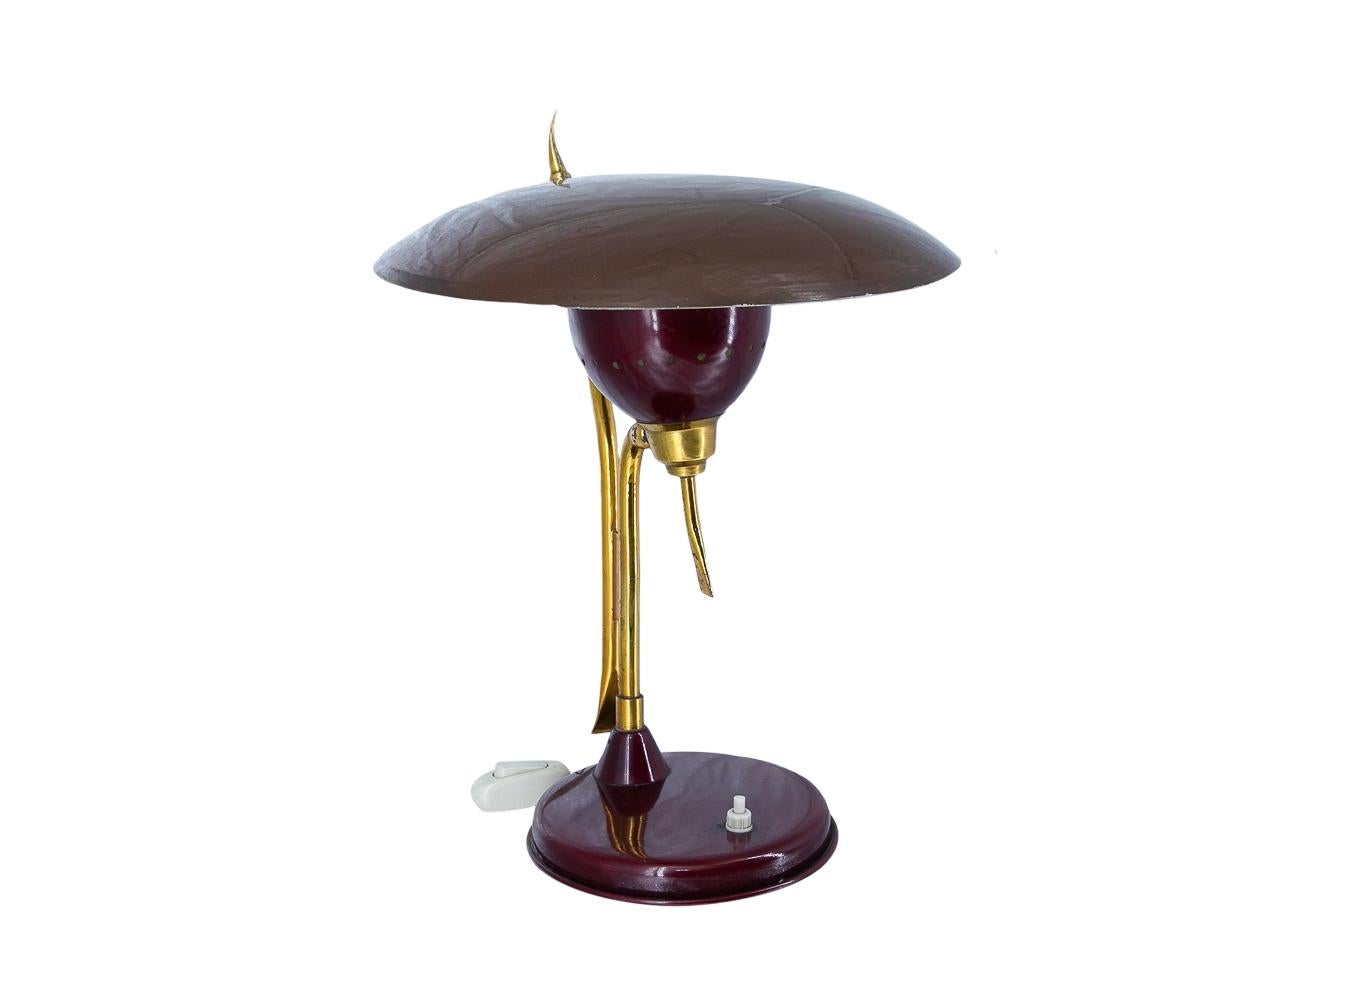 Lamp designed by the famous designer Oscar Torlasco, winner of the Compasso D'oro in 1959.
Desk / table lamp, wine color with reclining lampshade.
Made in Italy circa 1950s, 1950-1959 by the famous company Lumen
Italian plug.